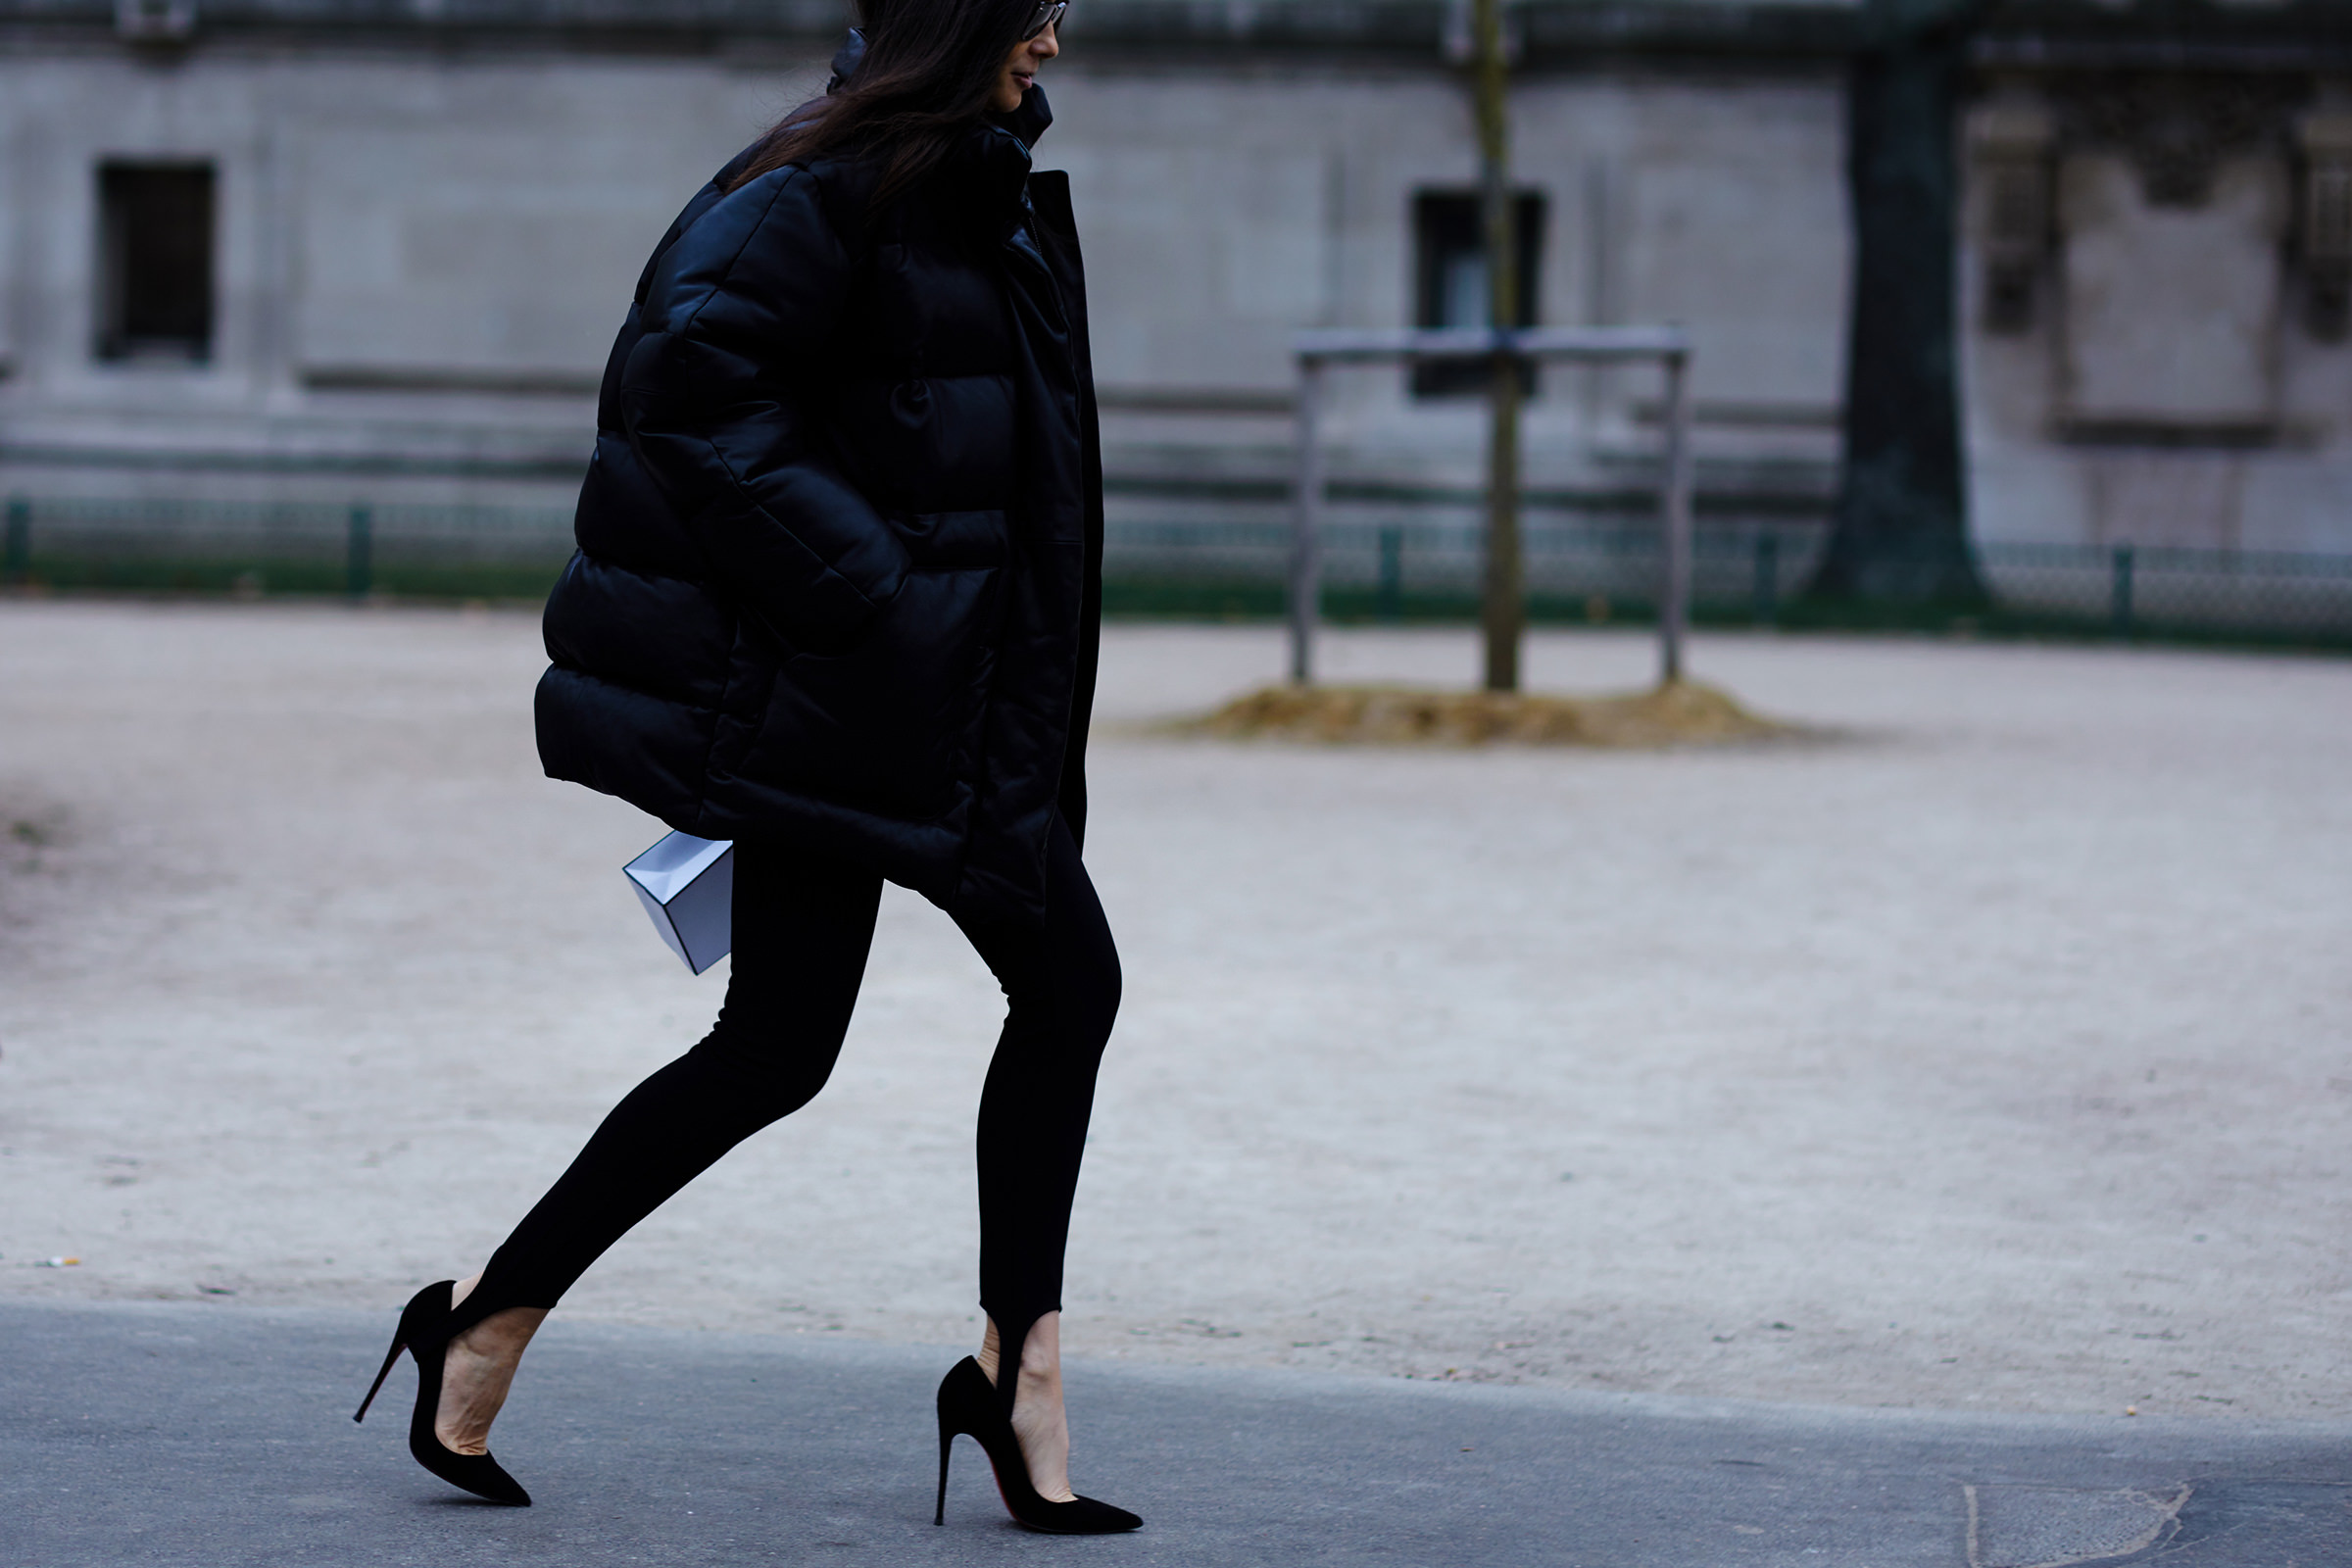 Paris Haute Couture S/S 2017 Street Style: Barbara Martelo wearing a black puffer jacket and black leggings after Chanel Haute Couture Fashion Show in Paris